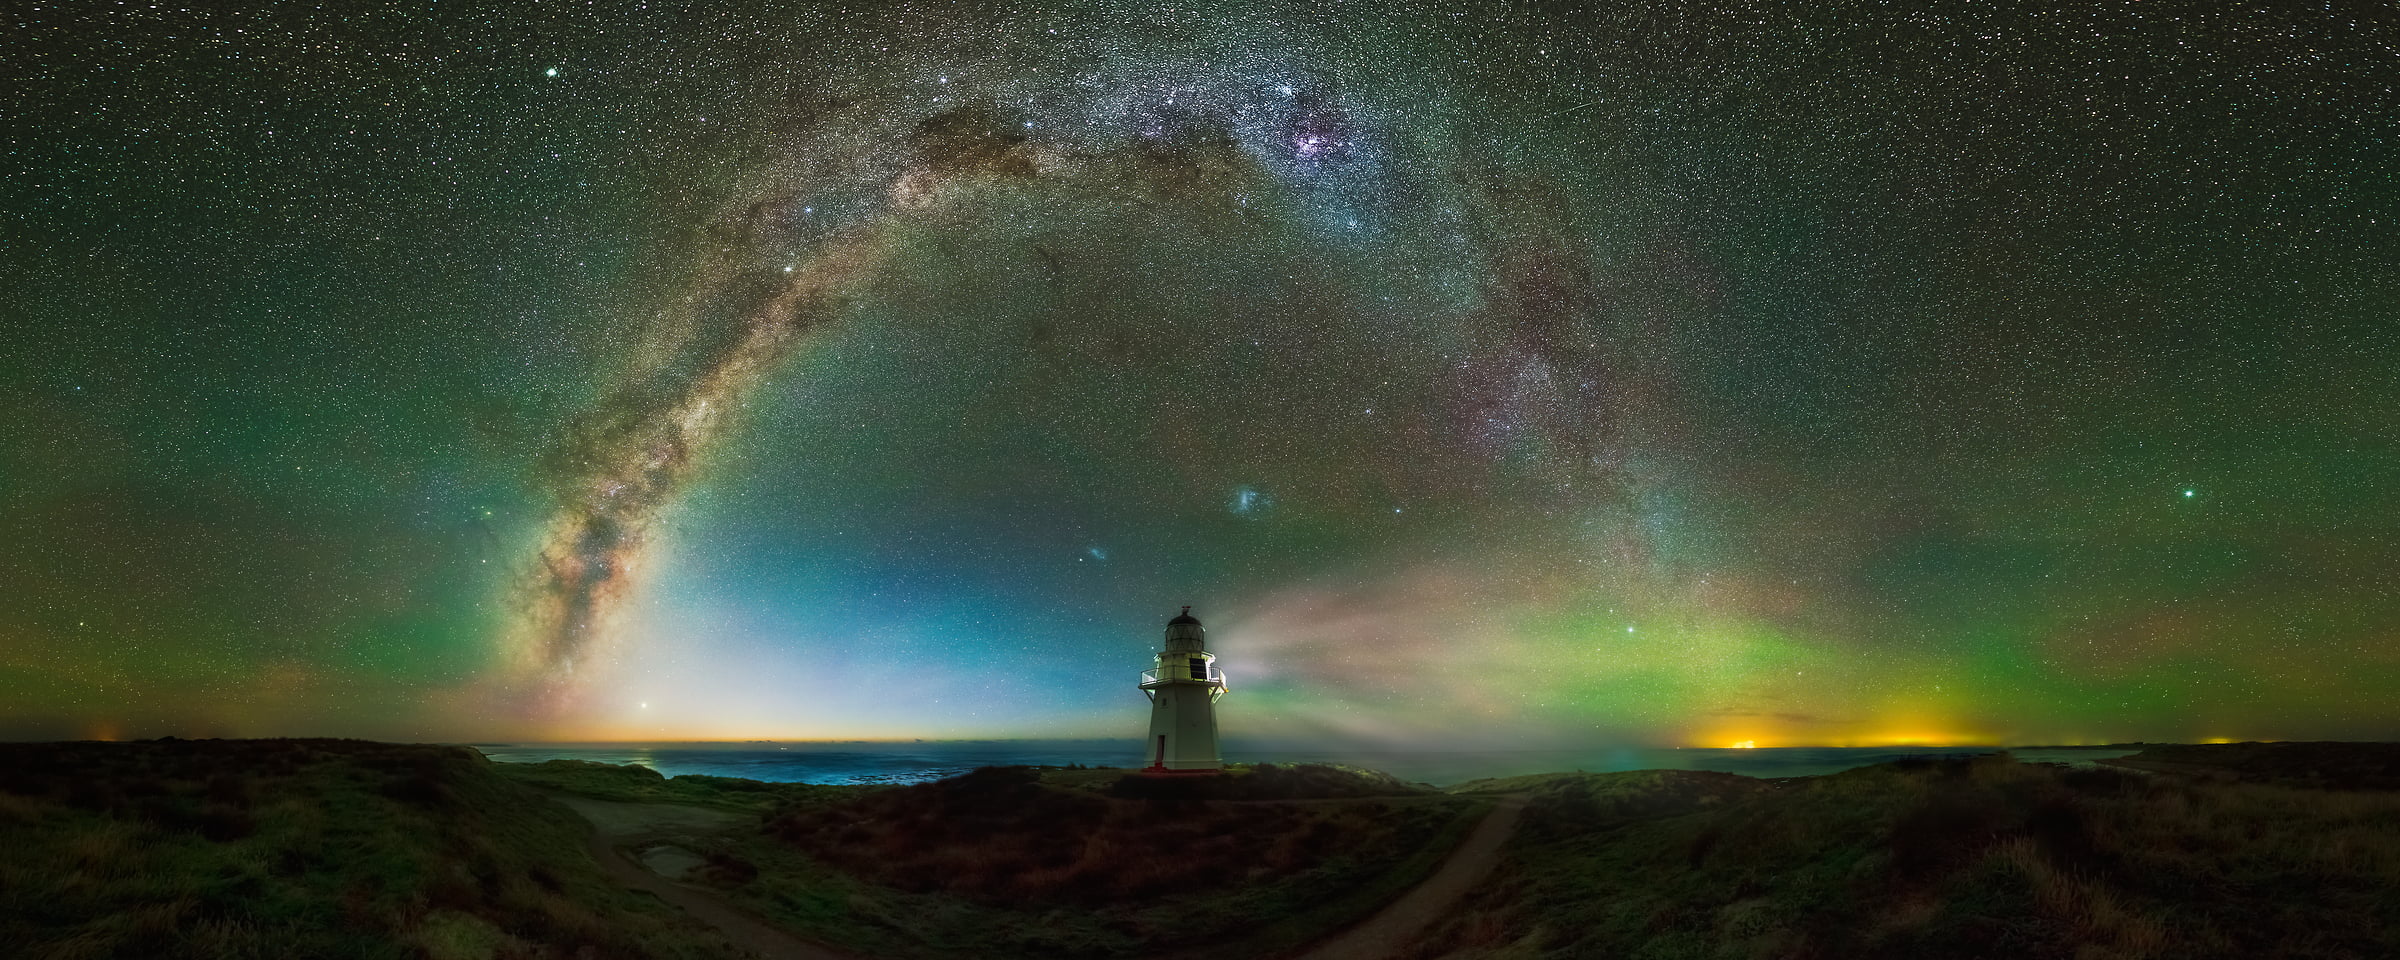 160 megapixels! A very high resolution, large-format VAST photo print of the night sky, milky way, and stars over a lighthouse; fine art astrophotography landscape photo created by Paul Wilson in Waipapa Point Lighthouse, Southland, New Zealand.